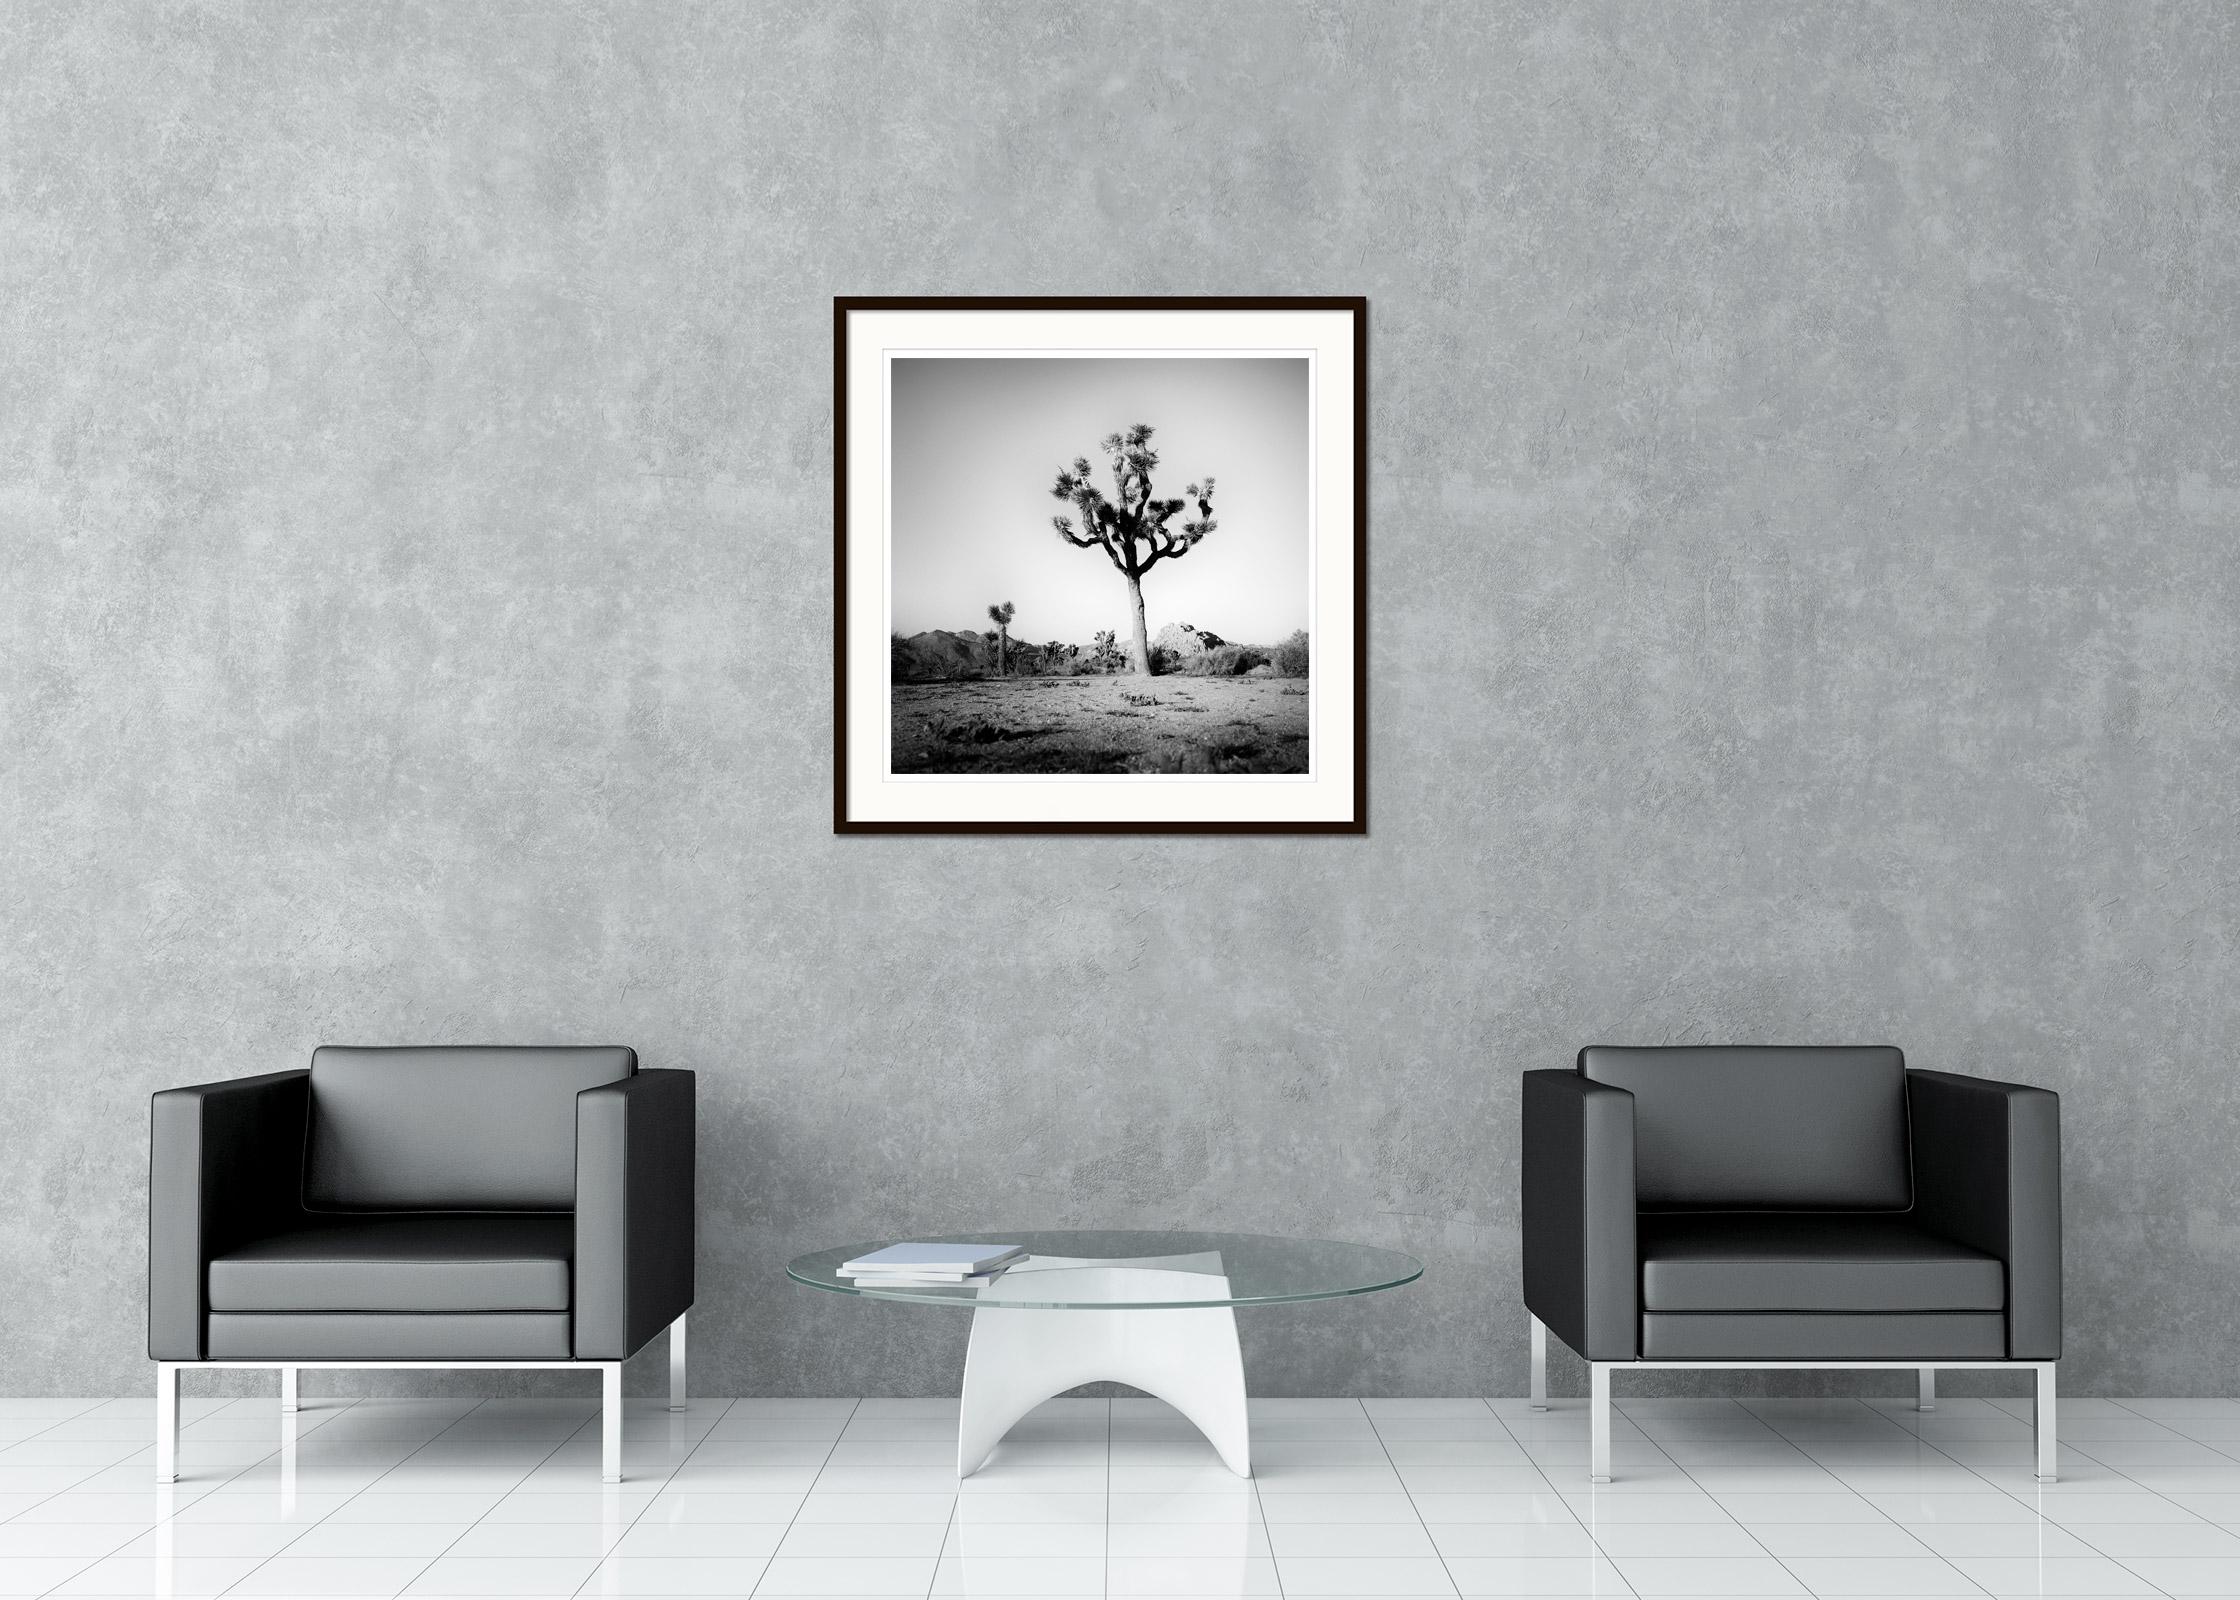 Black and White Fine Art Landscape Photography. Joshua Tree in National Park at sunset in California, USA. Archival pigment ink print, edition of 9. Signed, titled, dated and numbered by artist. Certificate of authenticity included. Printed with 4cm